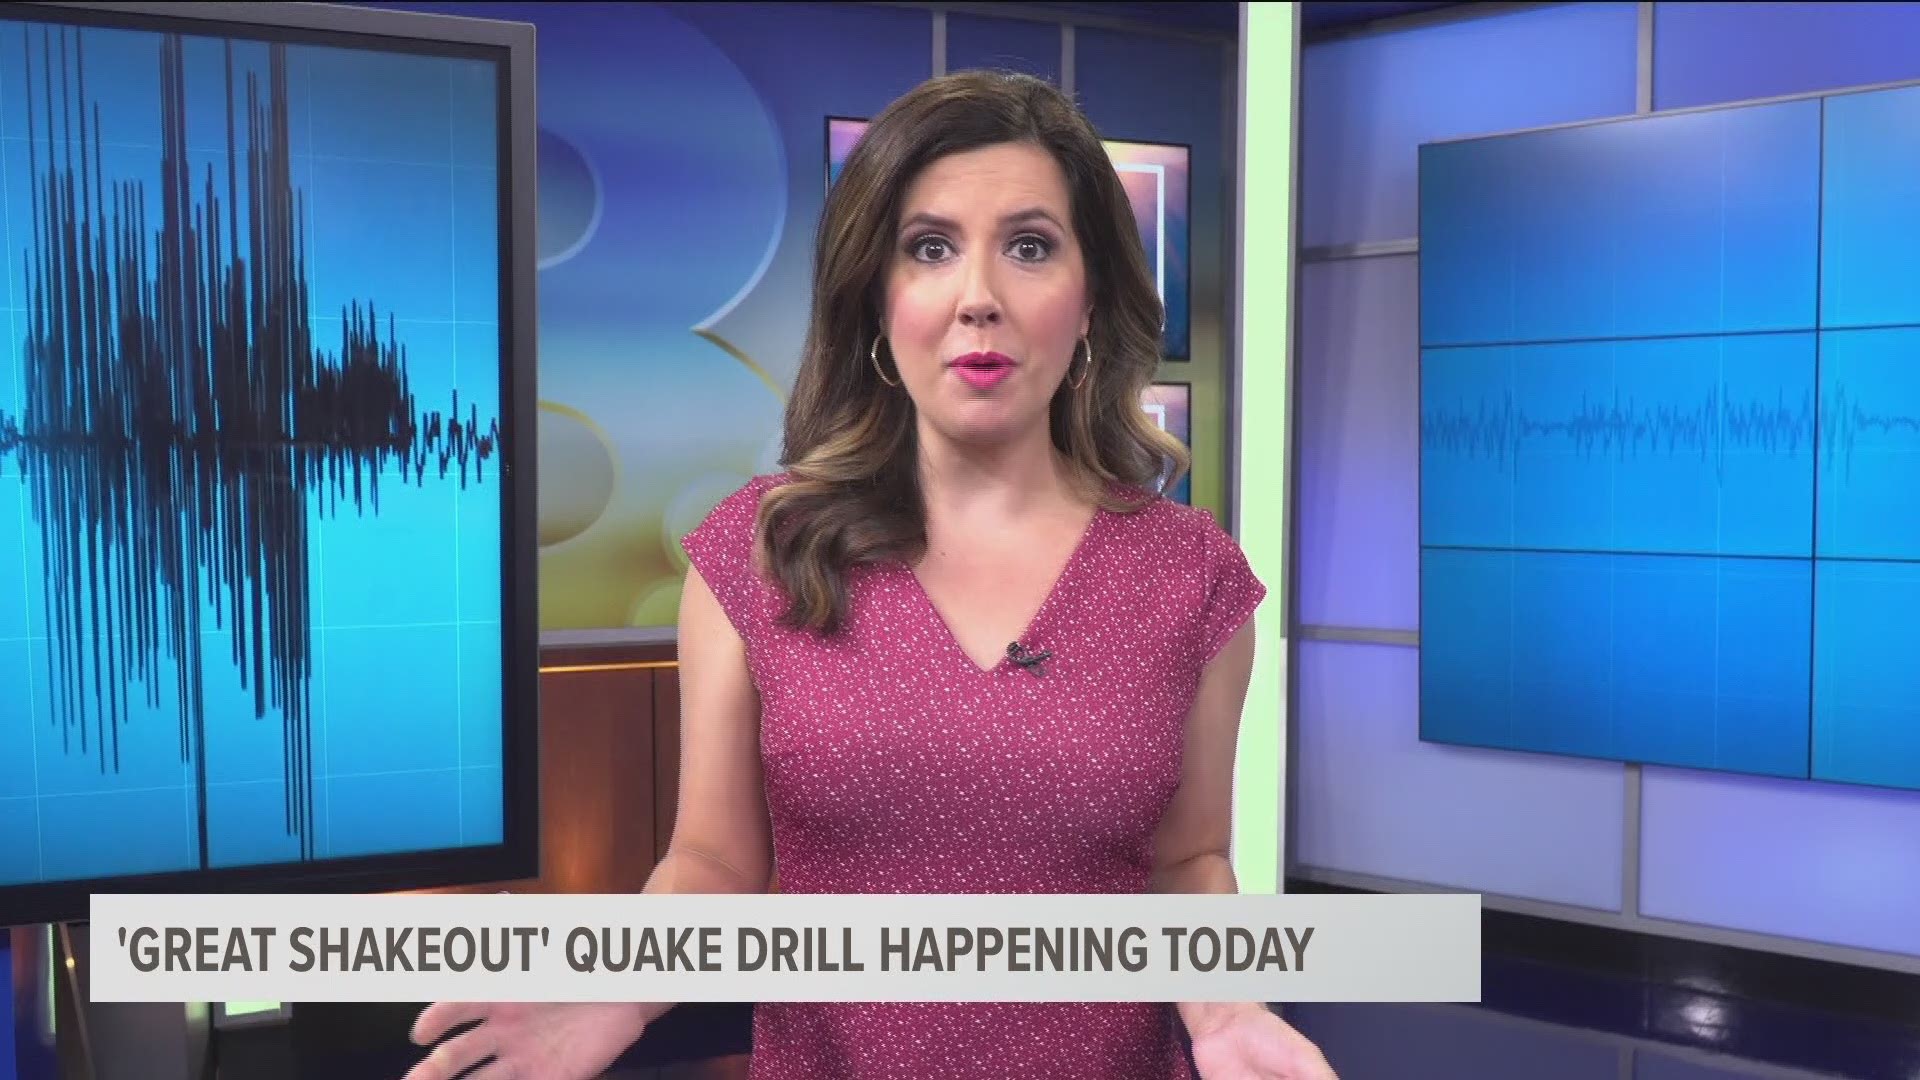 More than 700,000 people in Oregon and more than 180,000 in Southwest Washington have said they're going to participate in the big drill at 10:17am on Thursday.